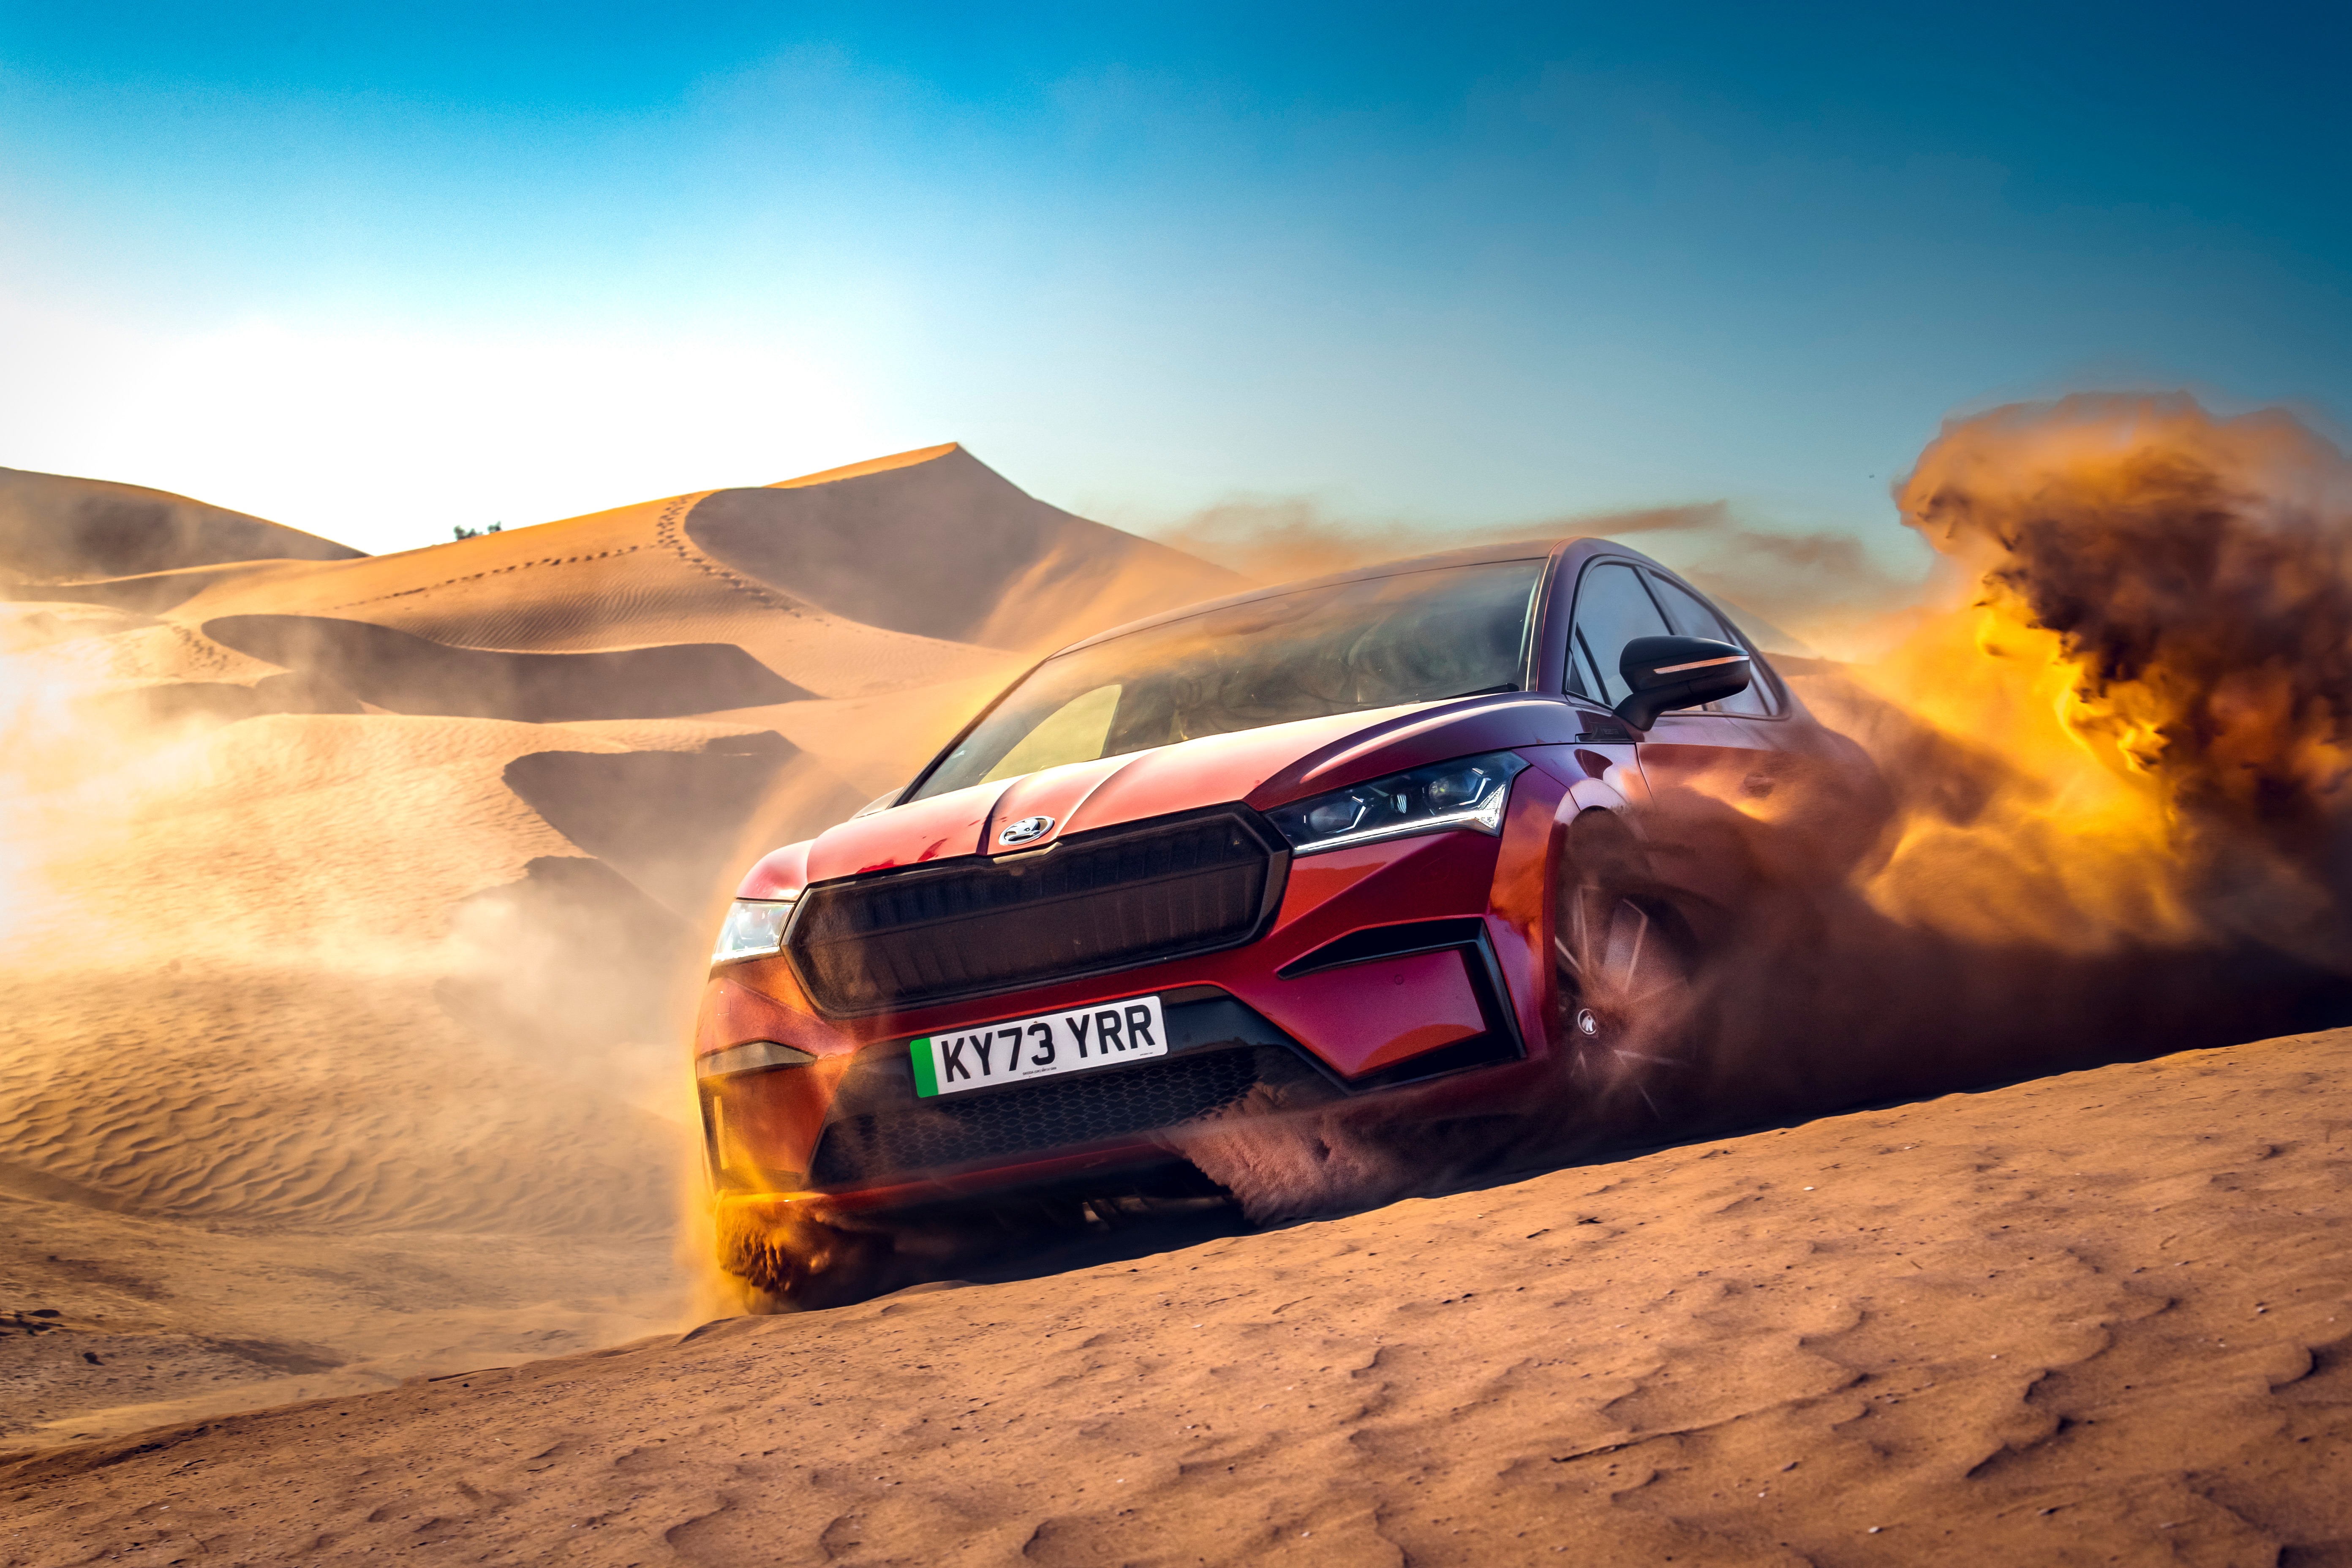 This Skoda Enyaq test car is 286hp and all-wheel drive, which means it’s a lot of fun when you stumble across some dunes in Morocco